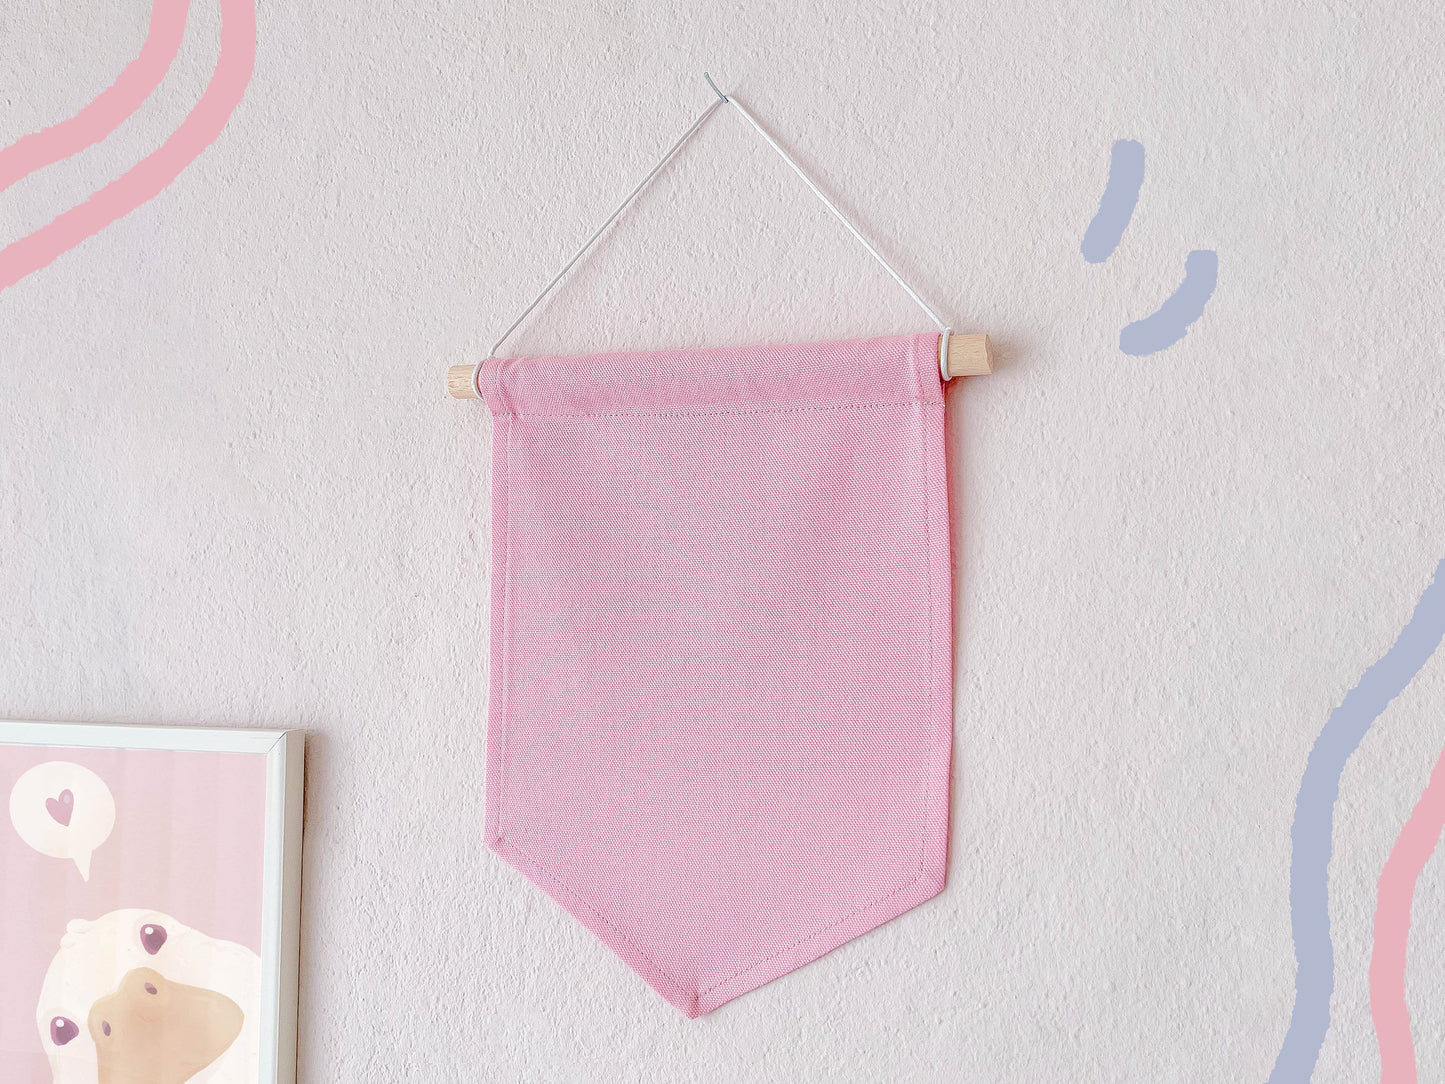 Cute Cotton Pin Banner | L 21cm x 30cm | Handmade in Germany | Light Pink Canvas Fabric | Classic Pin Display